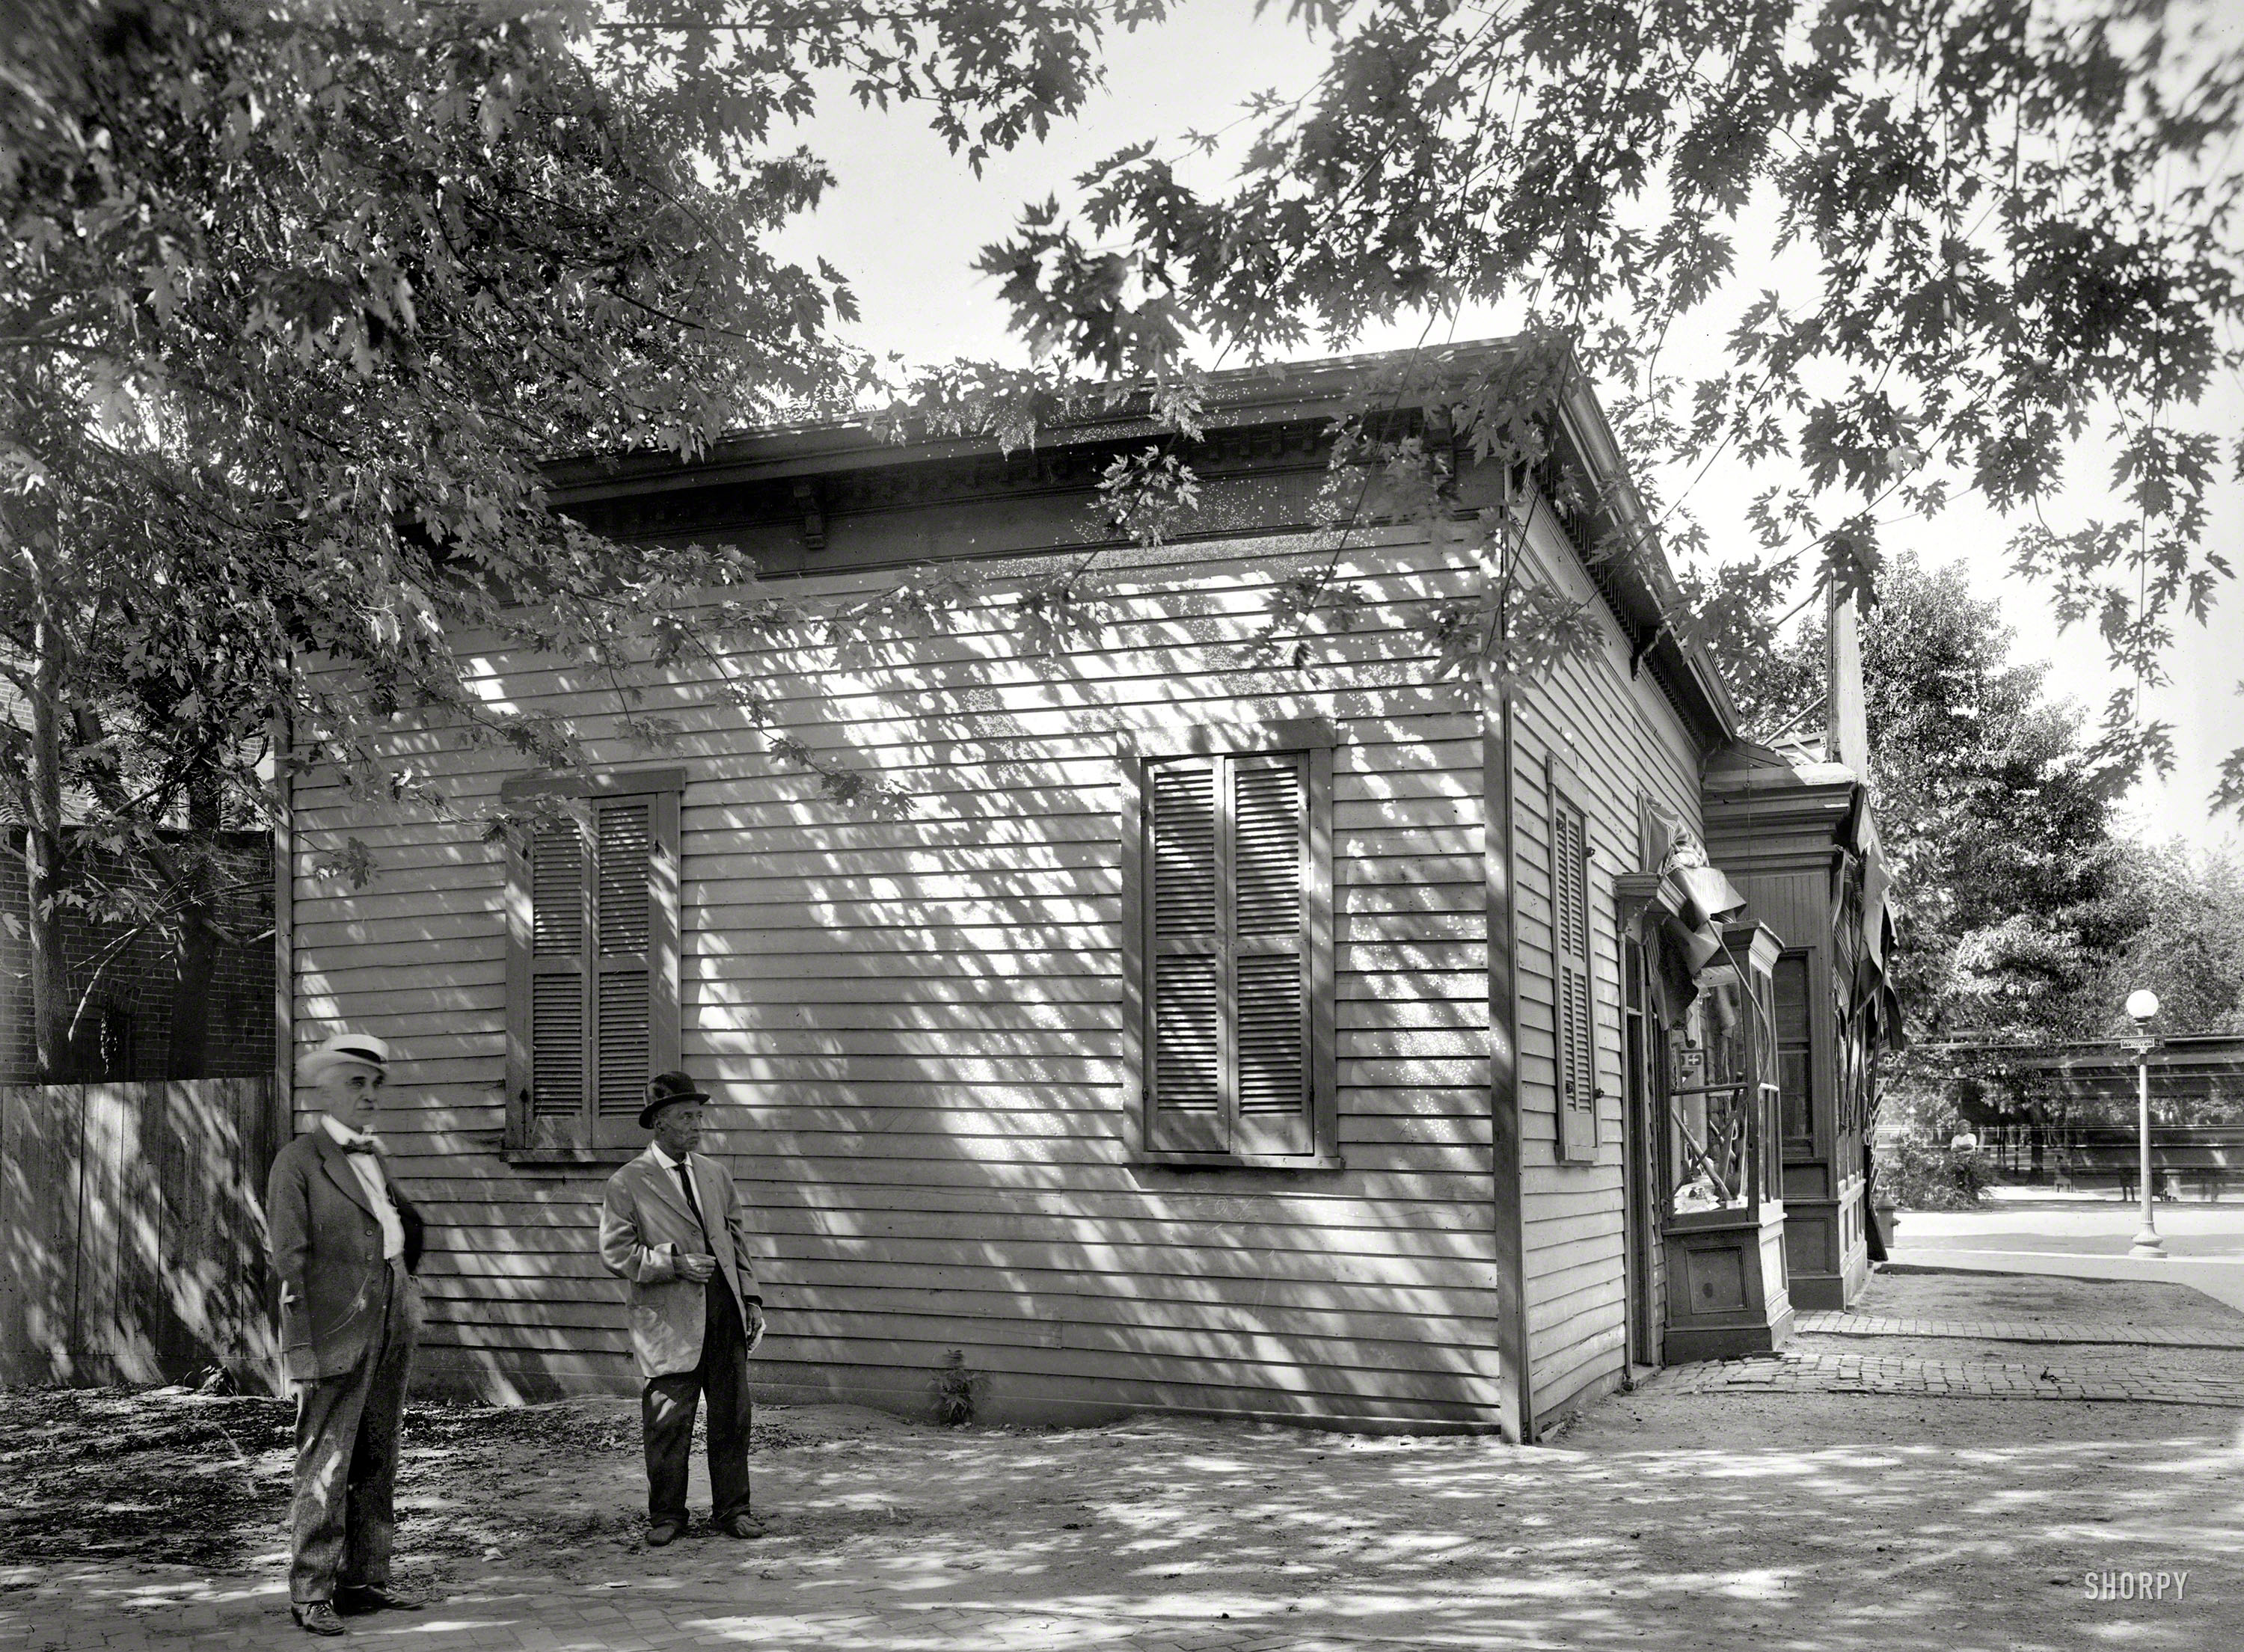 Circa 1917. "Said to be the first school in the District of Columbia, 4th & C Streets S.E." National Photo Company Collection glass negative. View full size.